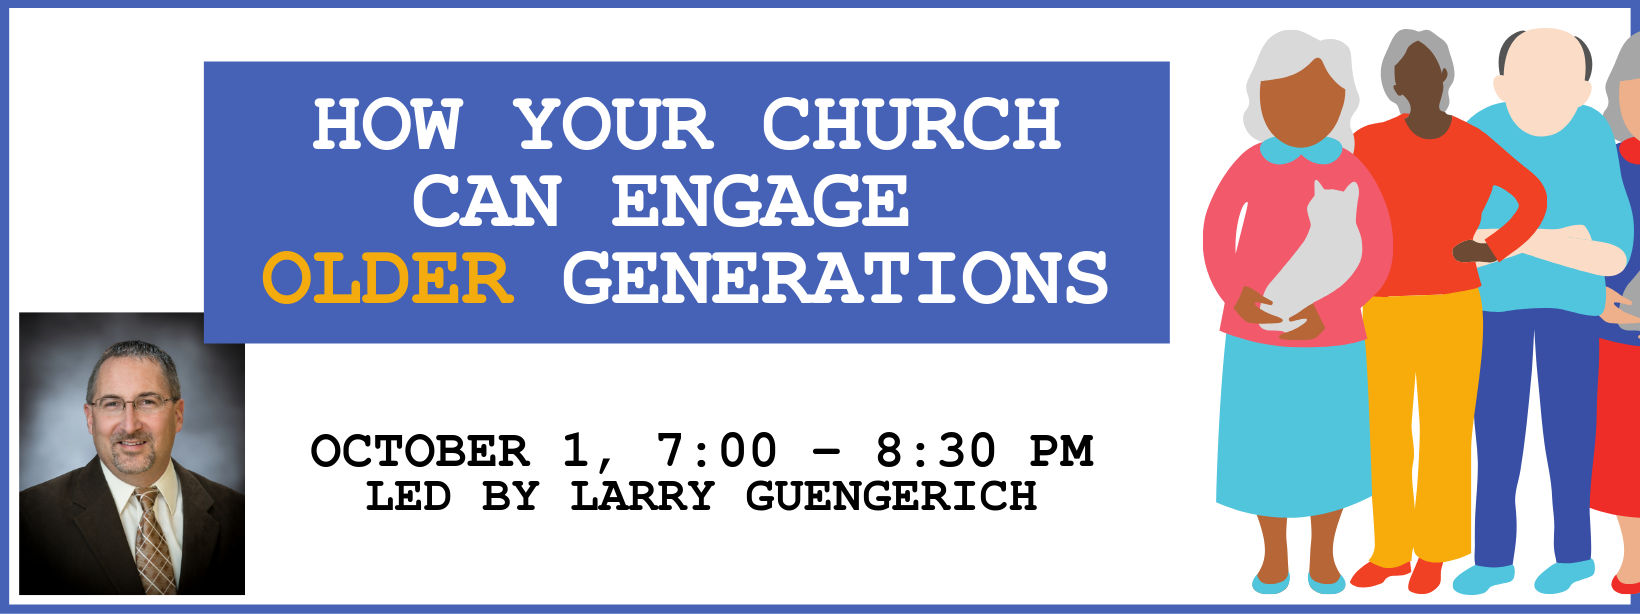 How Your Church Can Engage Older Generations